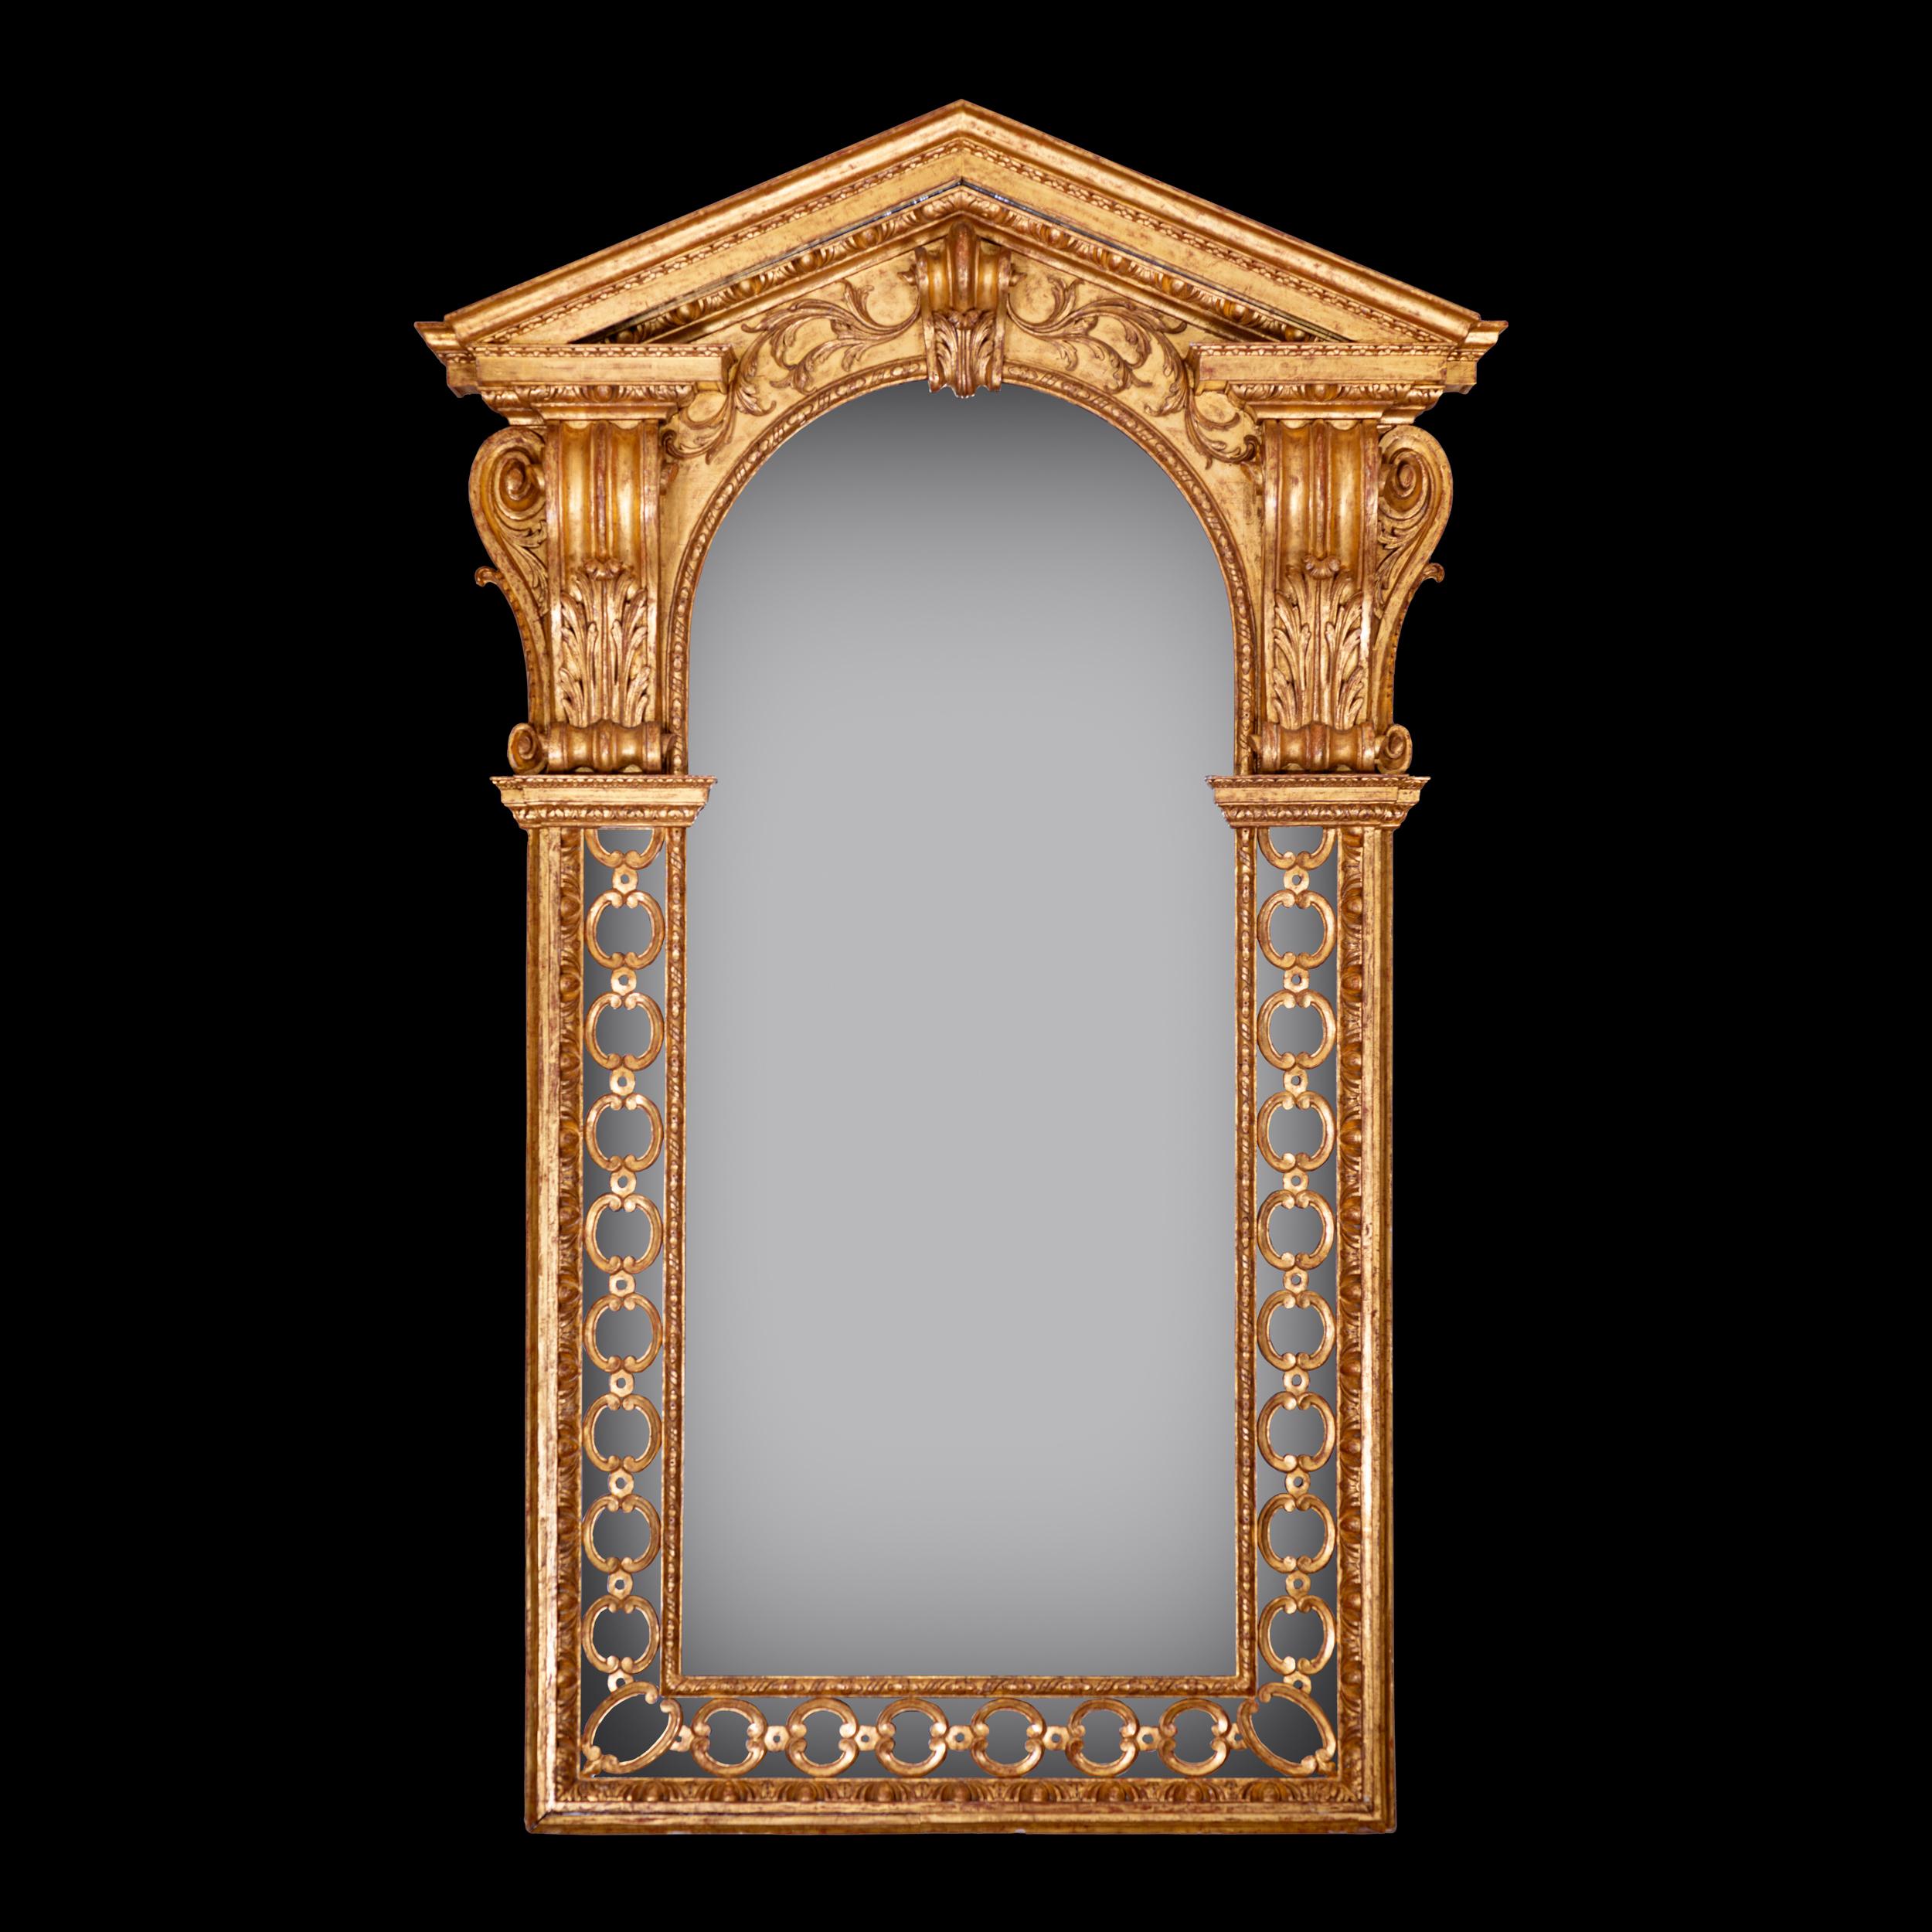 This extraordinary architectural mirror belongs to a group of mirrors by the Booker family that all share similar strong influences of William Kent.. A drawing by Kent for an organ case, engraved by John Vardy, relates to the design of the mirror. A